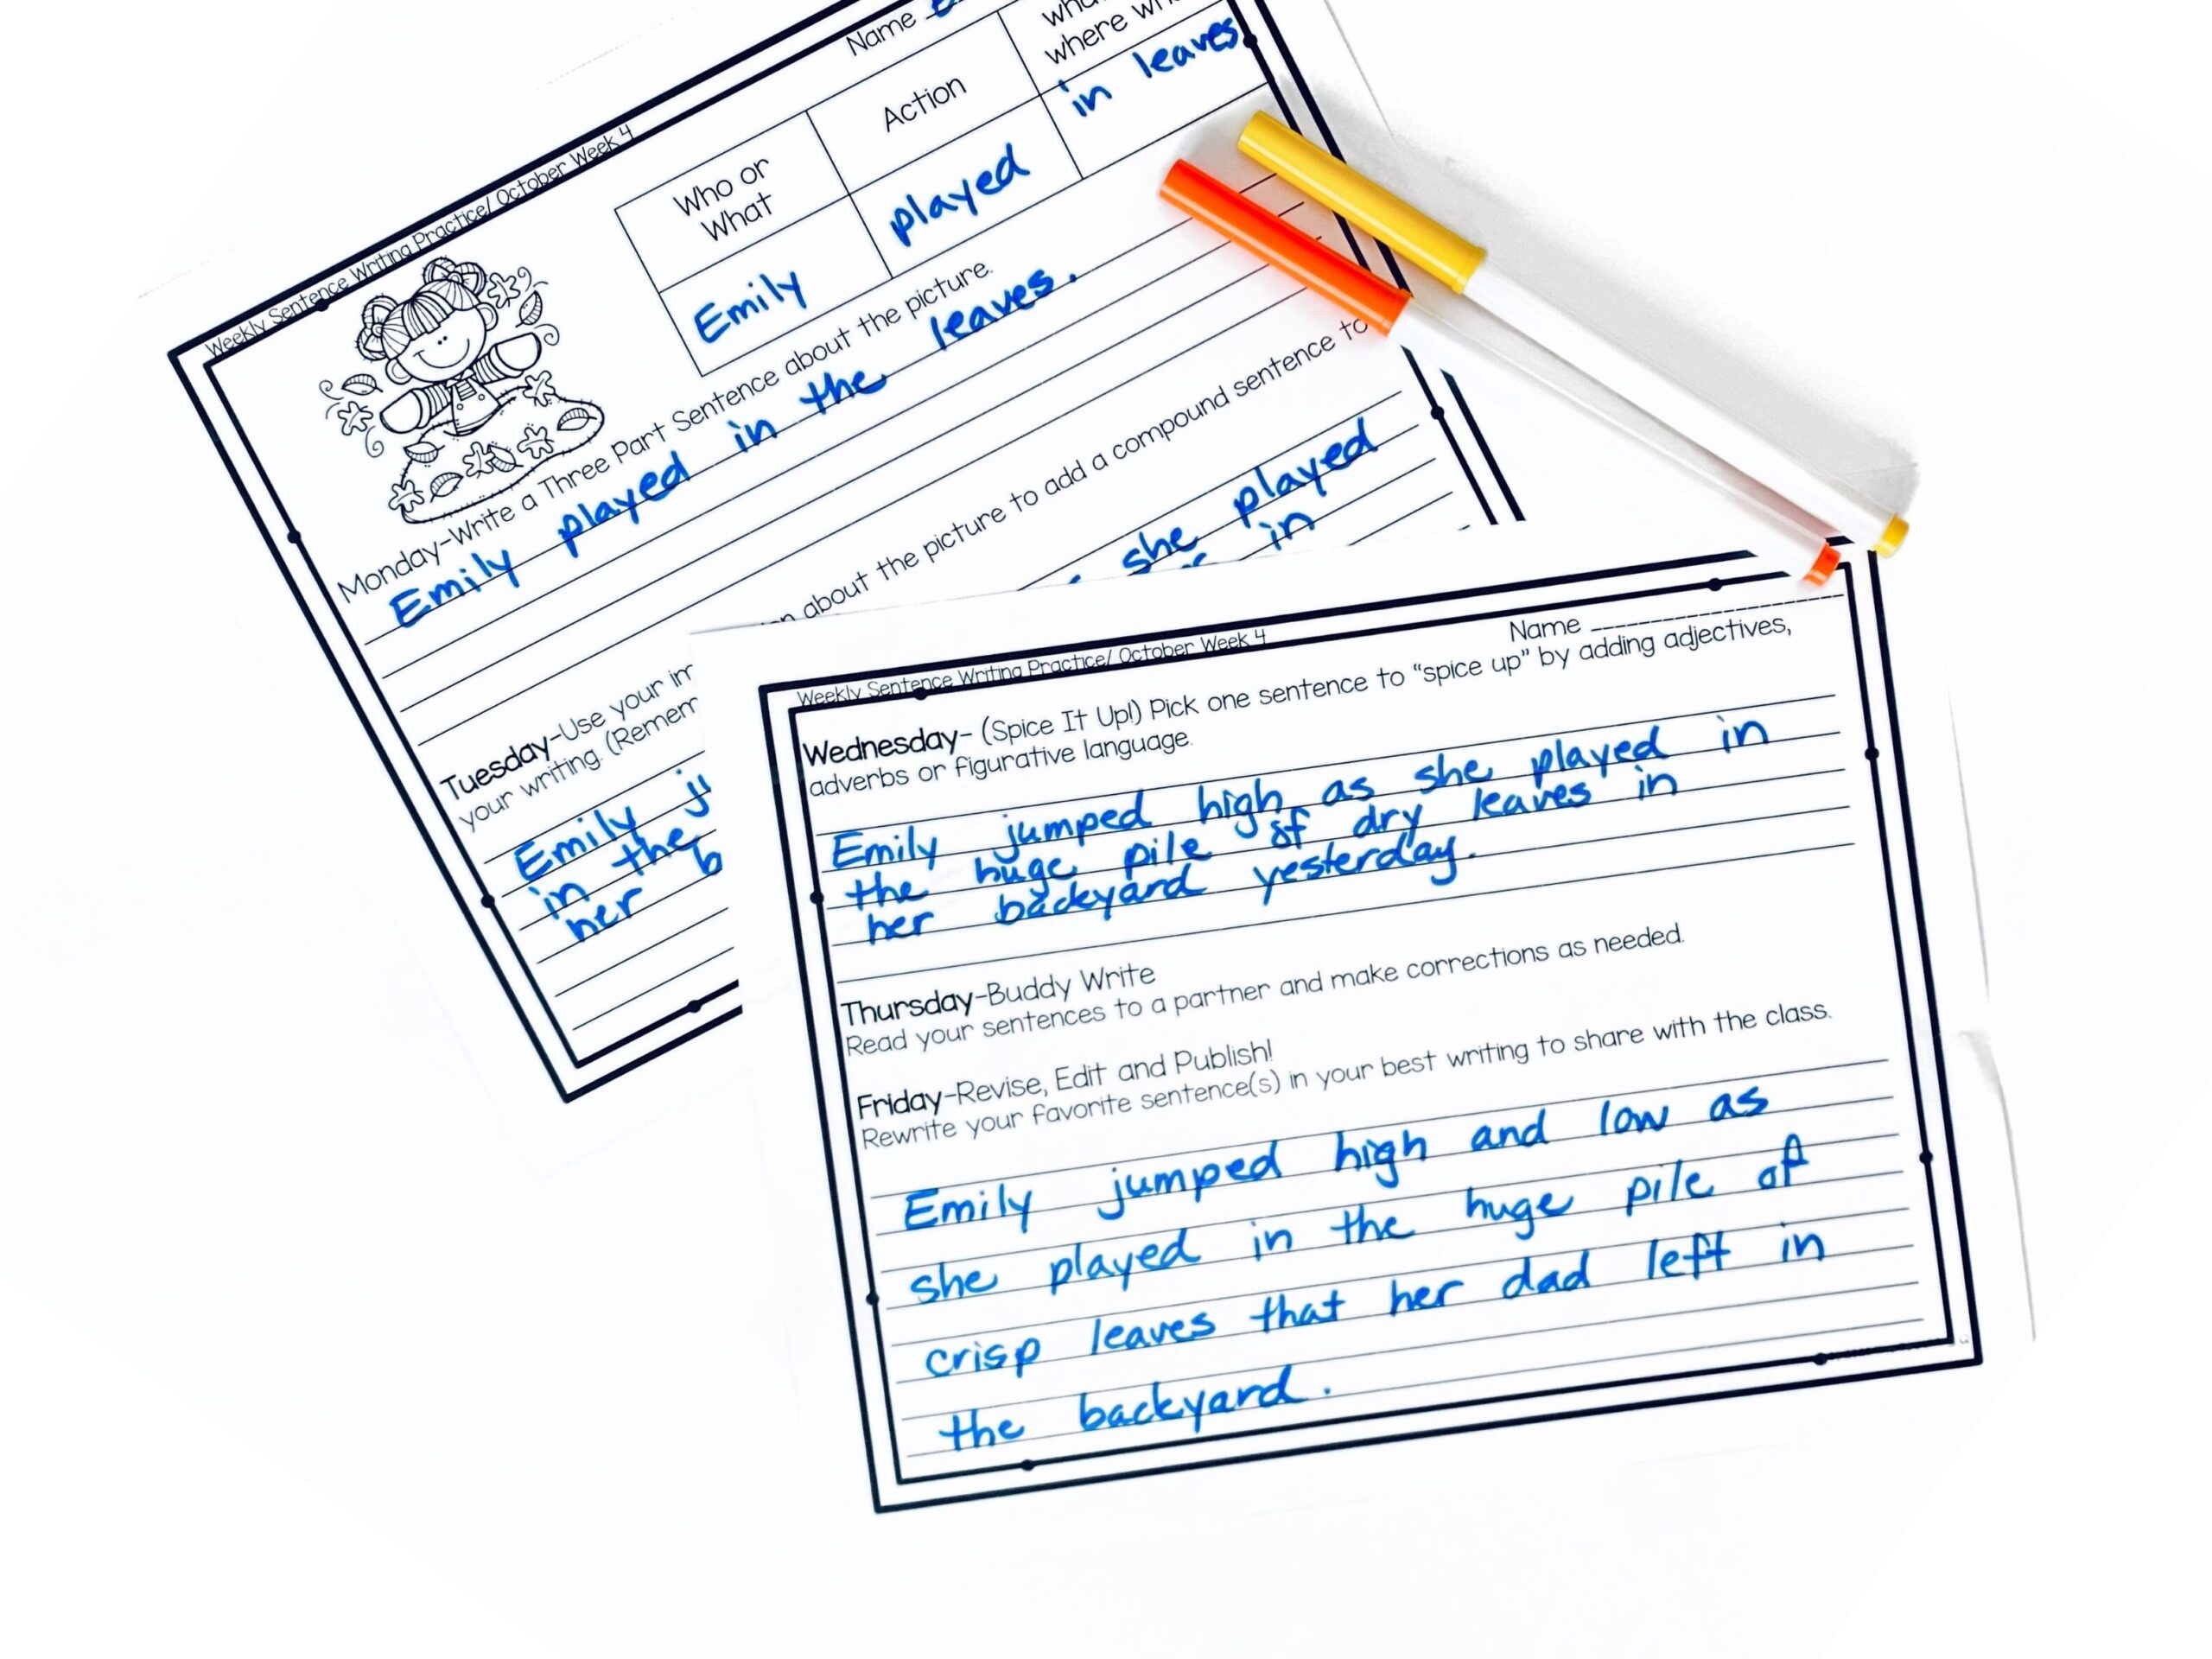 A photo of the sentence writing skills practice worksheet.